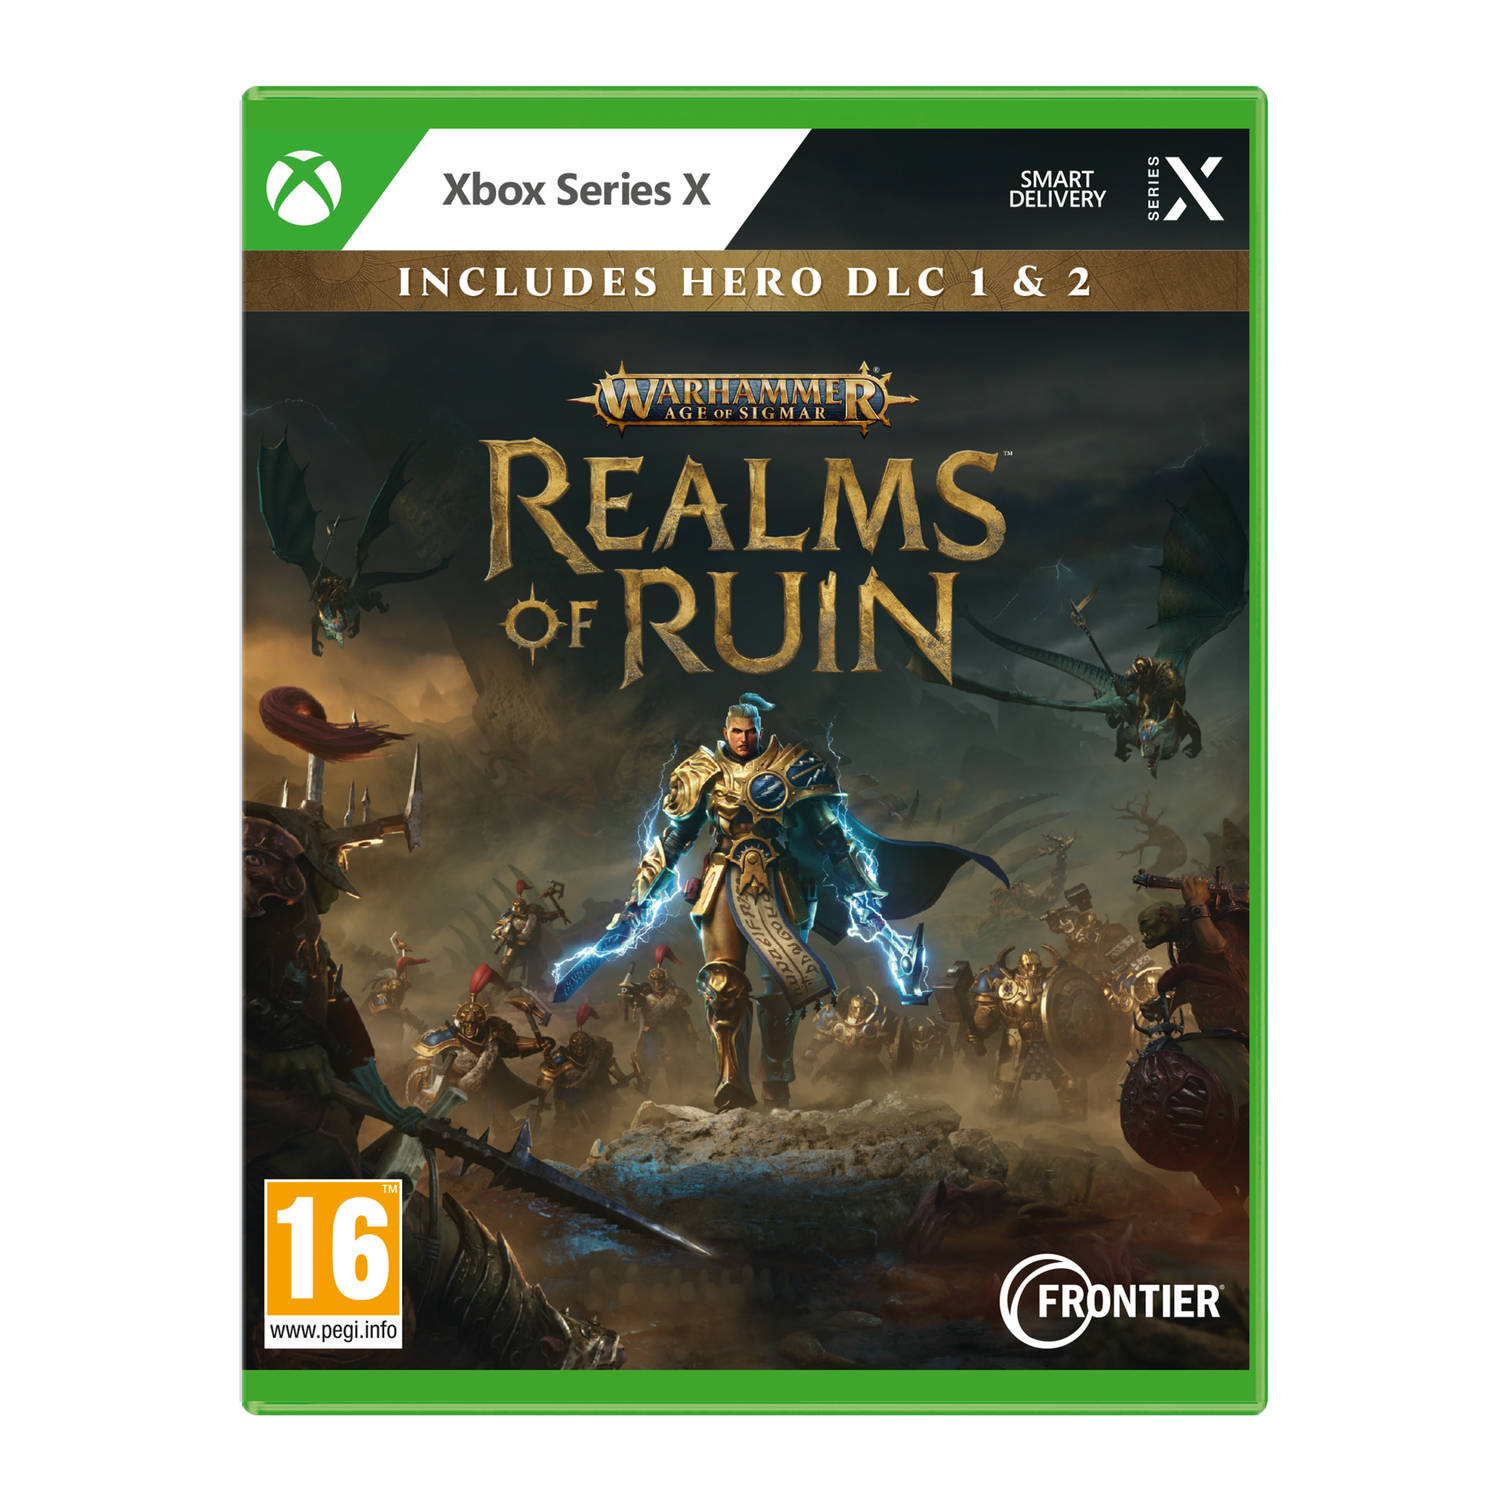 Warhammer: Age of Sigmar Realms of Ruin Xbox Series X